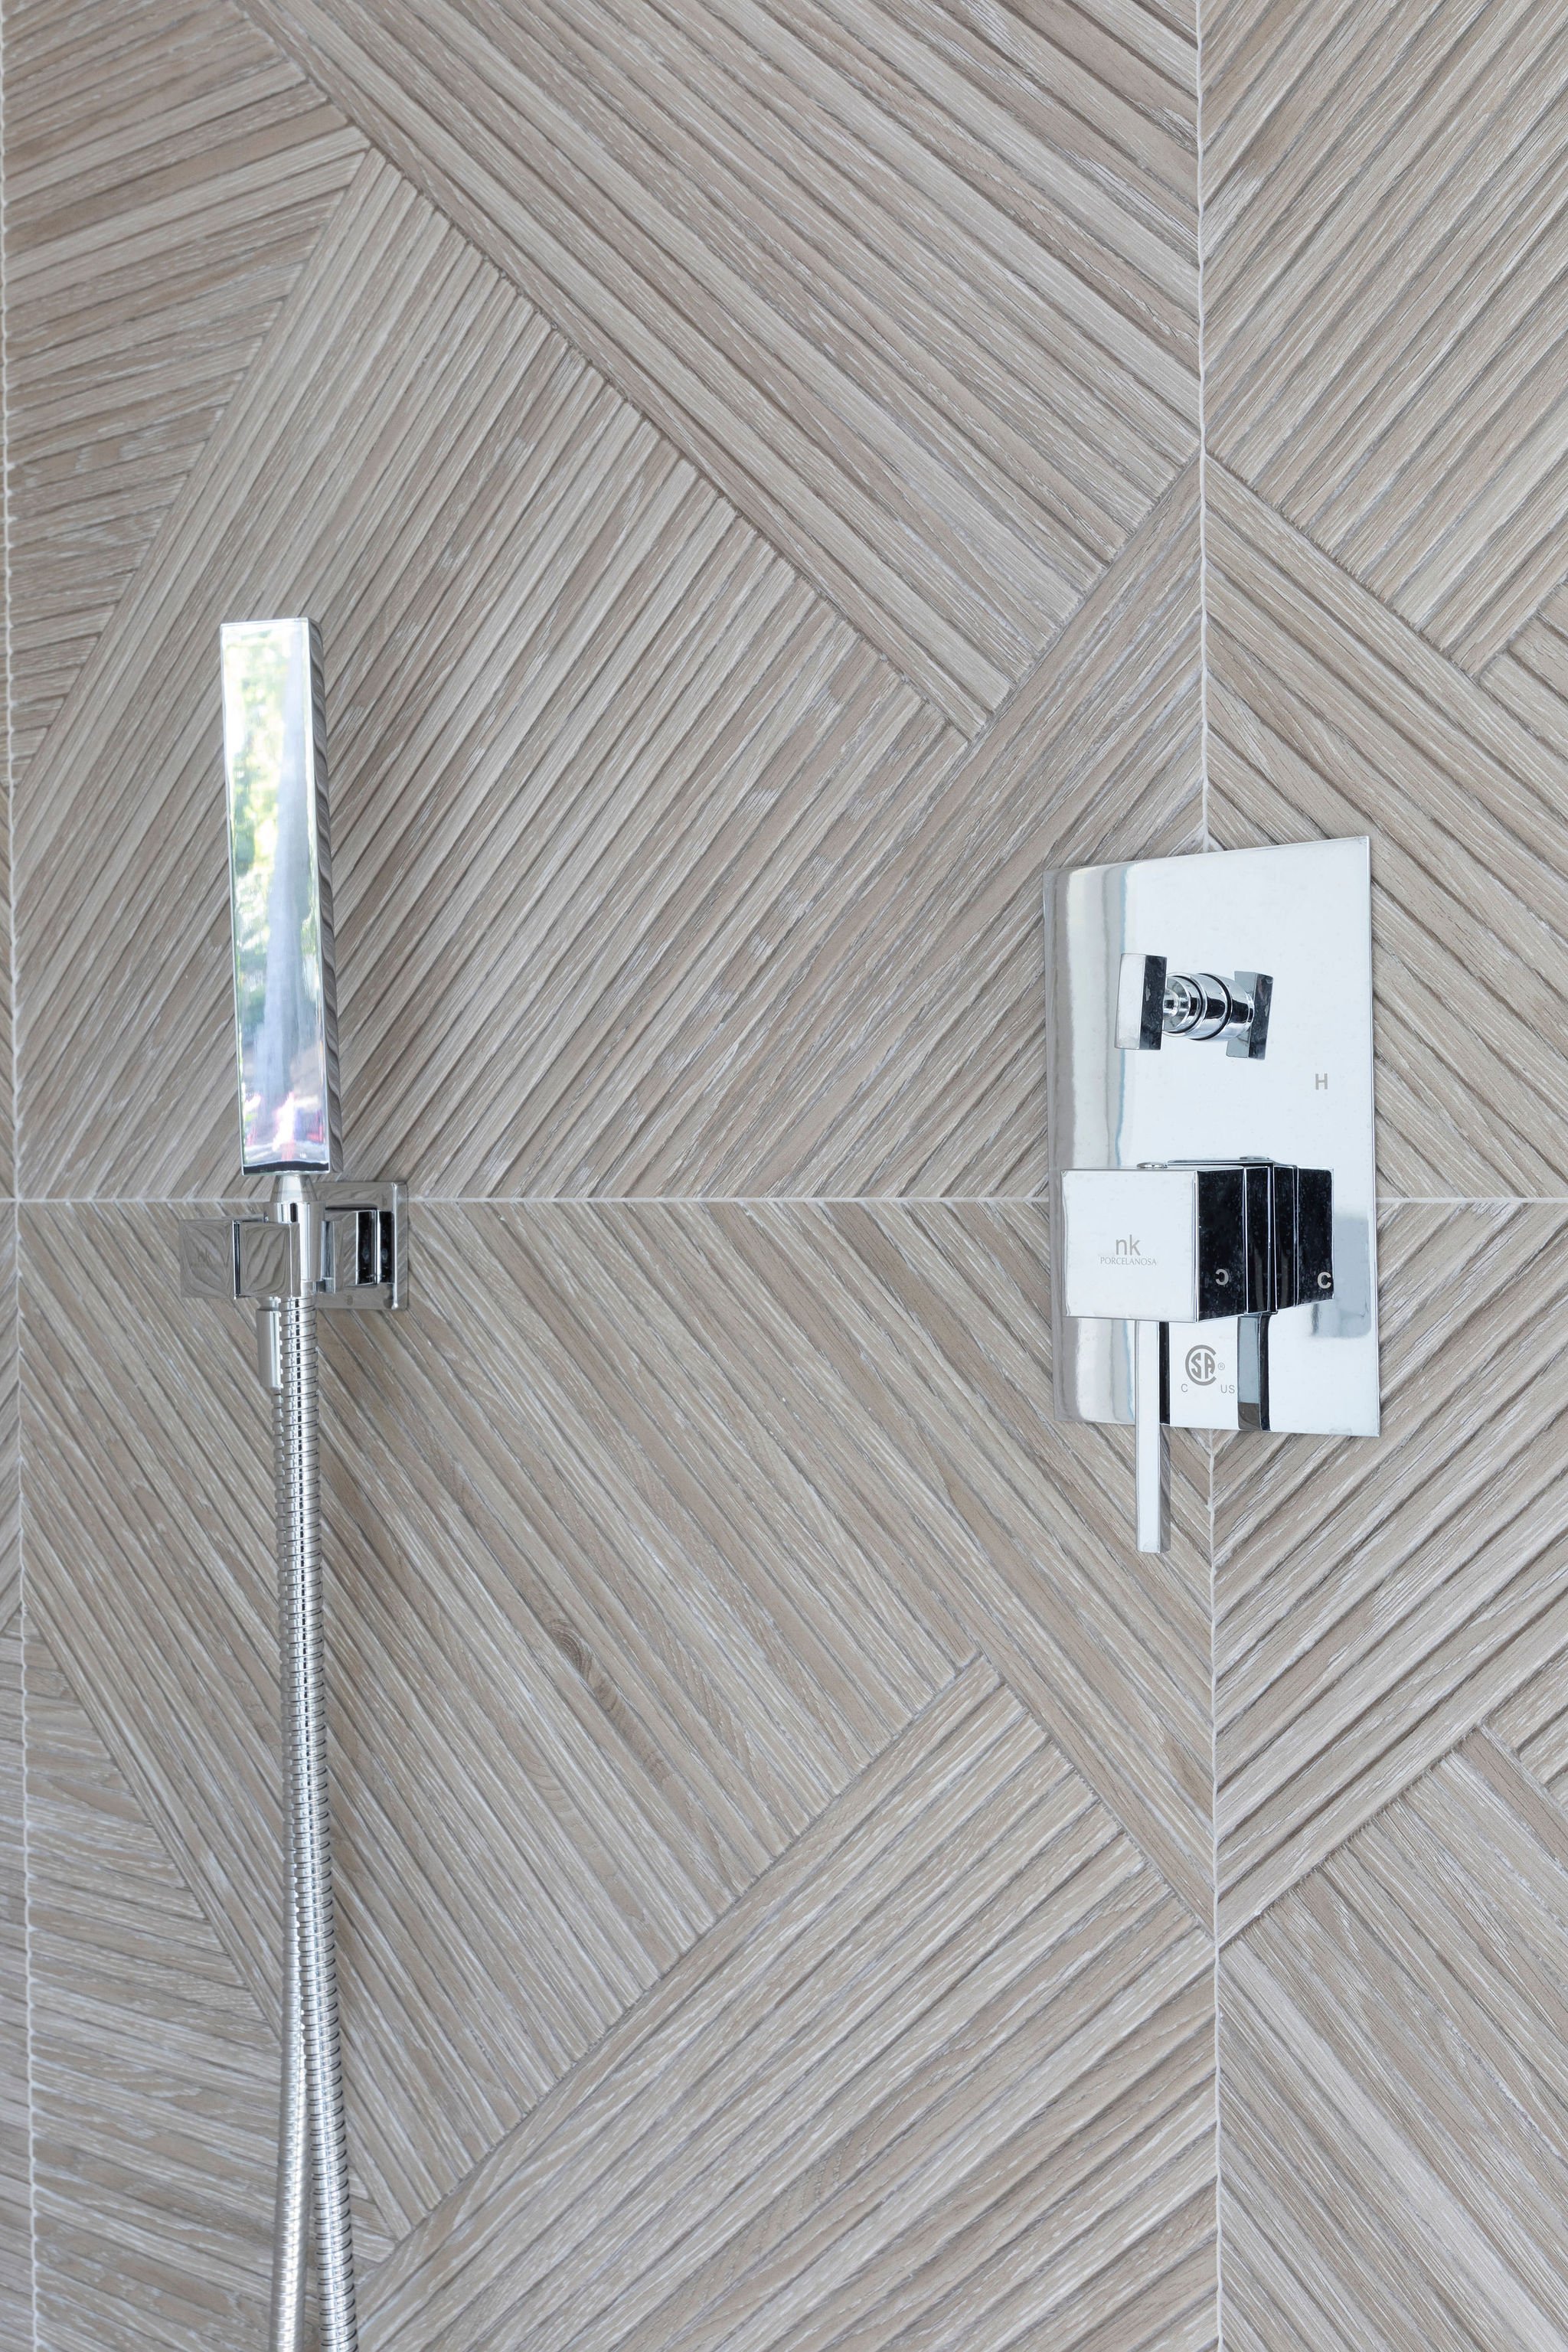  Textured geometric tile surround this guest shower. 